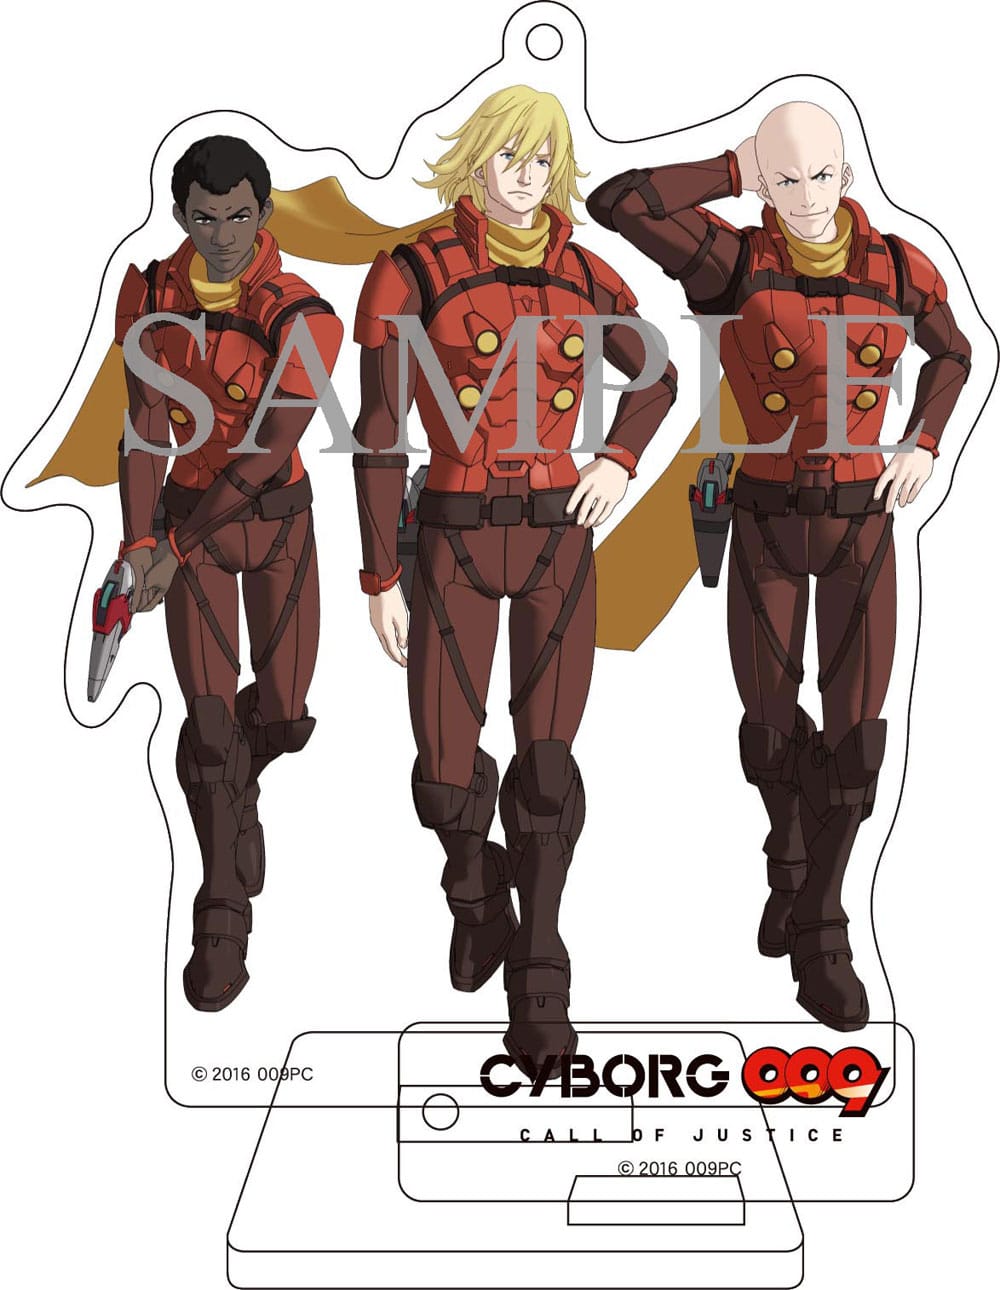 yTOHO animation STORE ŁzCYBORG009 CALL OF JUSTICE Vol.2 DVD 񐶎Y+IWiANX^fBZbg